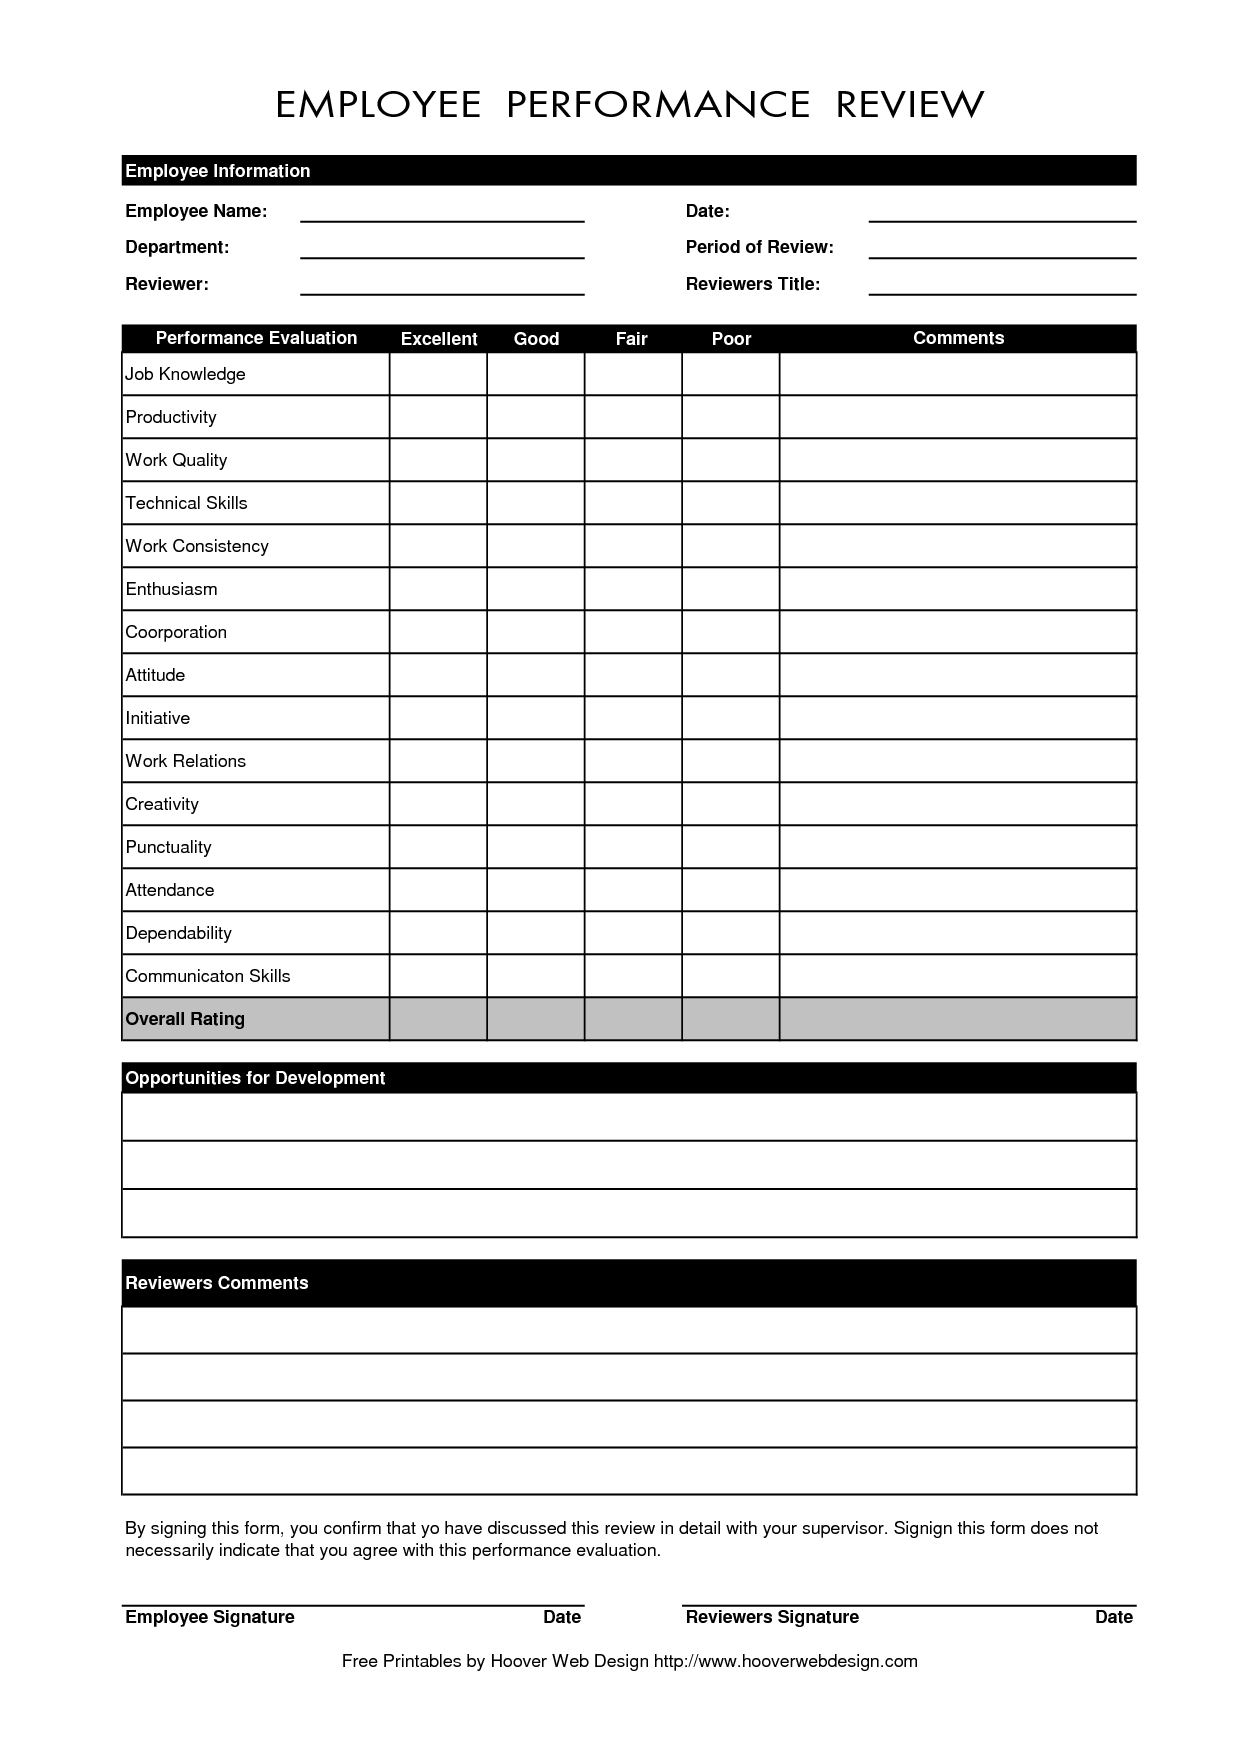 Free Employee Performance Review Forms | Excel | Pinterest - Free Employee Evaluation Forms Printable